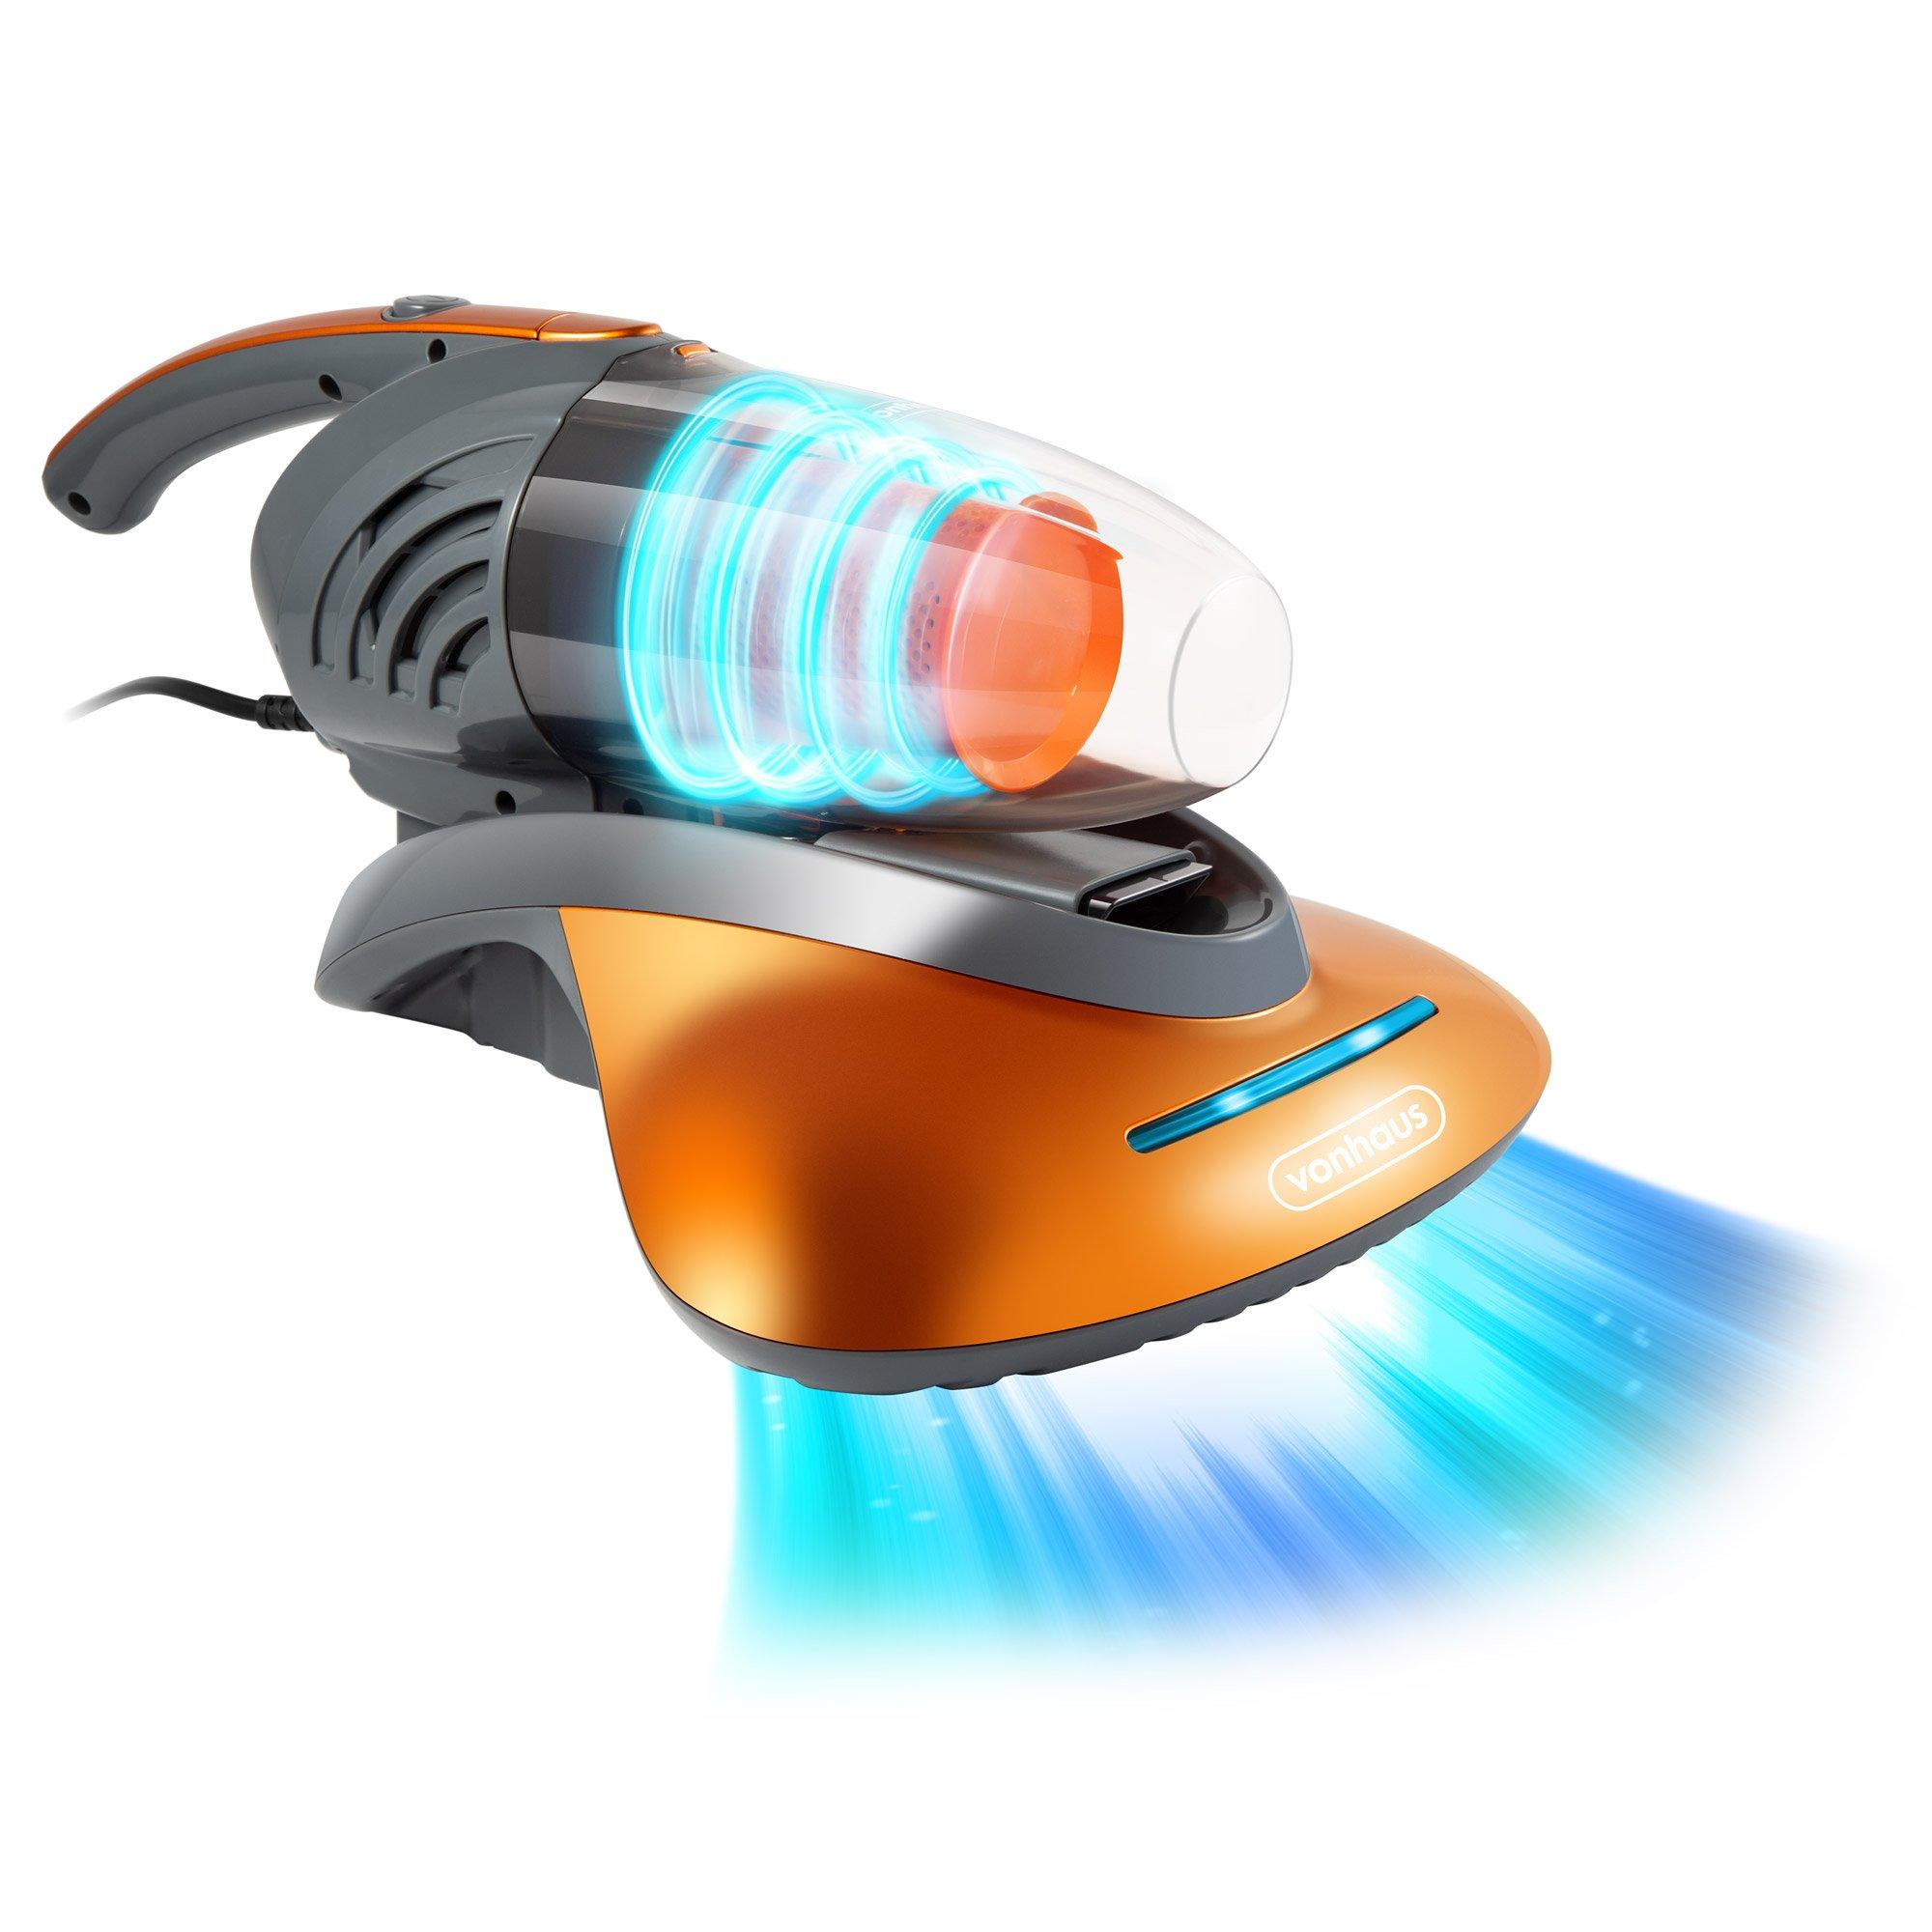 Handheld UV Vacuum Cleaner with 1.2L Dust Tank & Crevice Tool